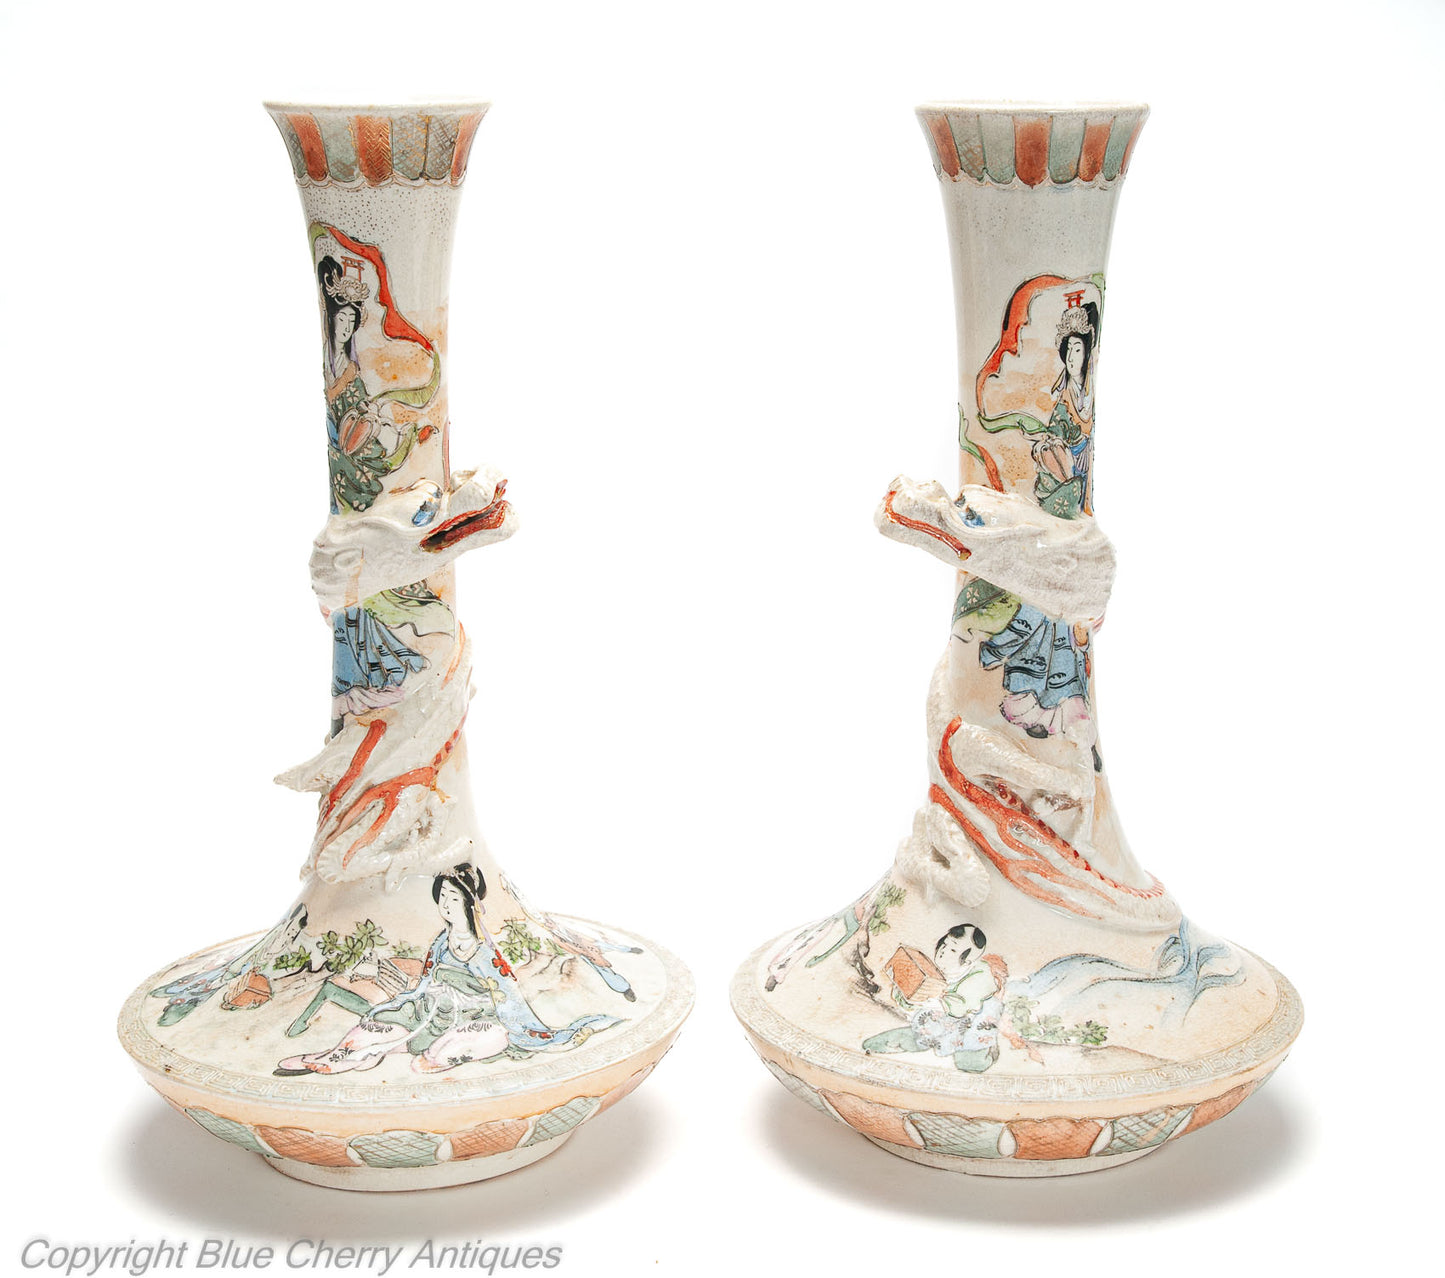 Japanese Satsuma Ware Pottery Antique Pair of Vases with Dragons & Figures c1900 (Code 2000)